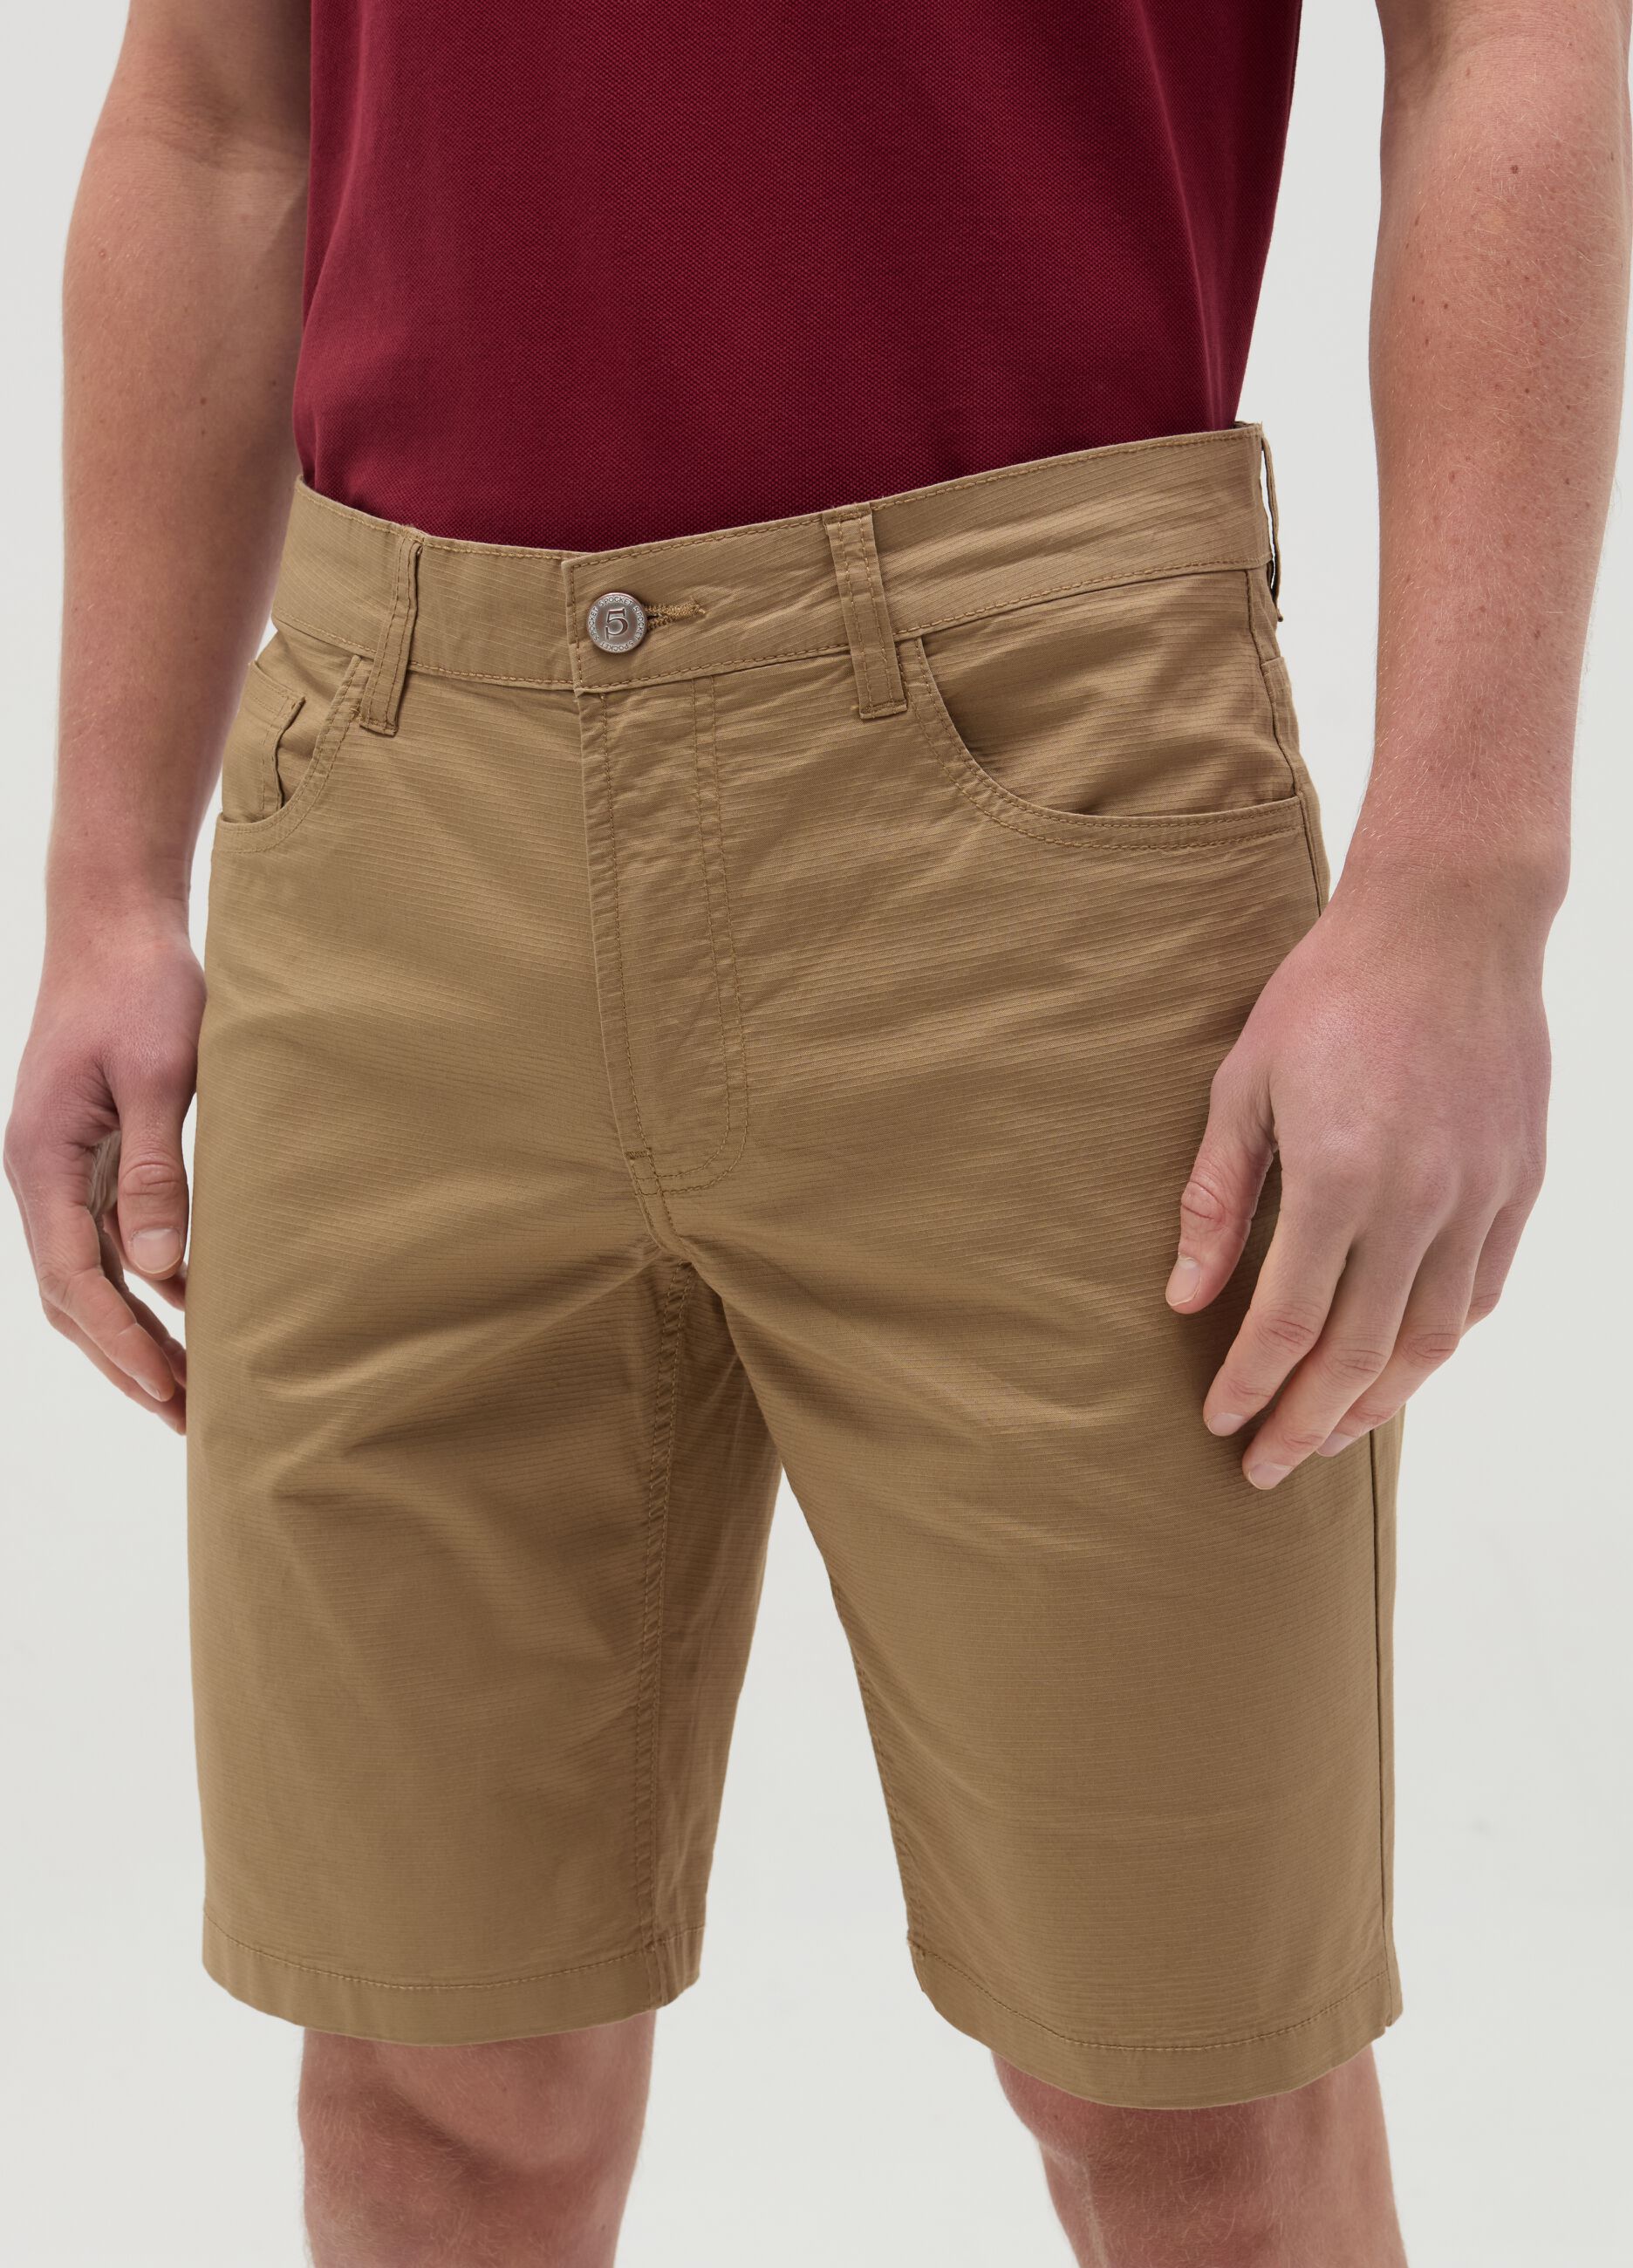 Bermuda shorts with five pockets and ripstop weave